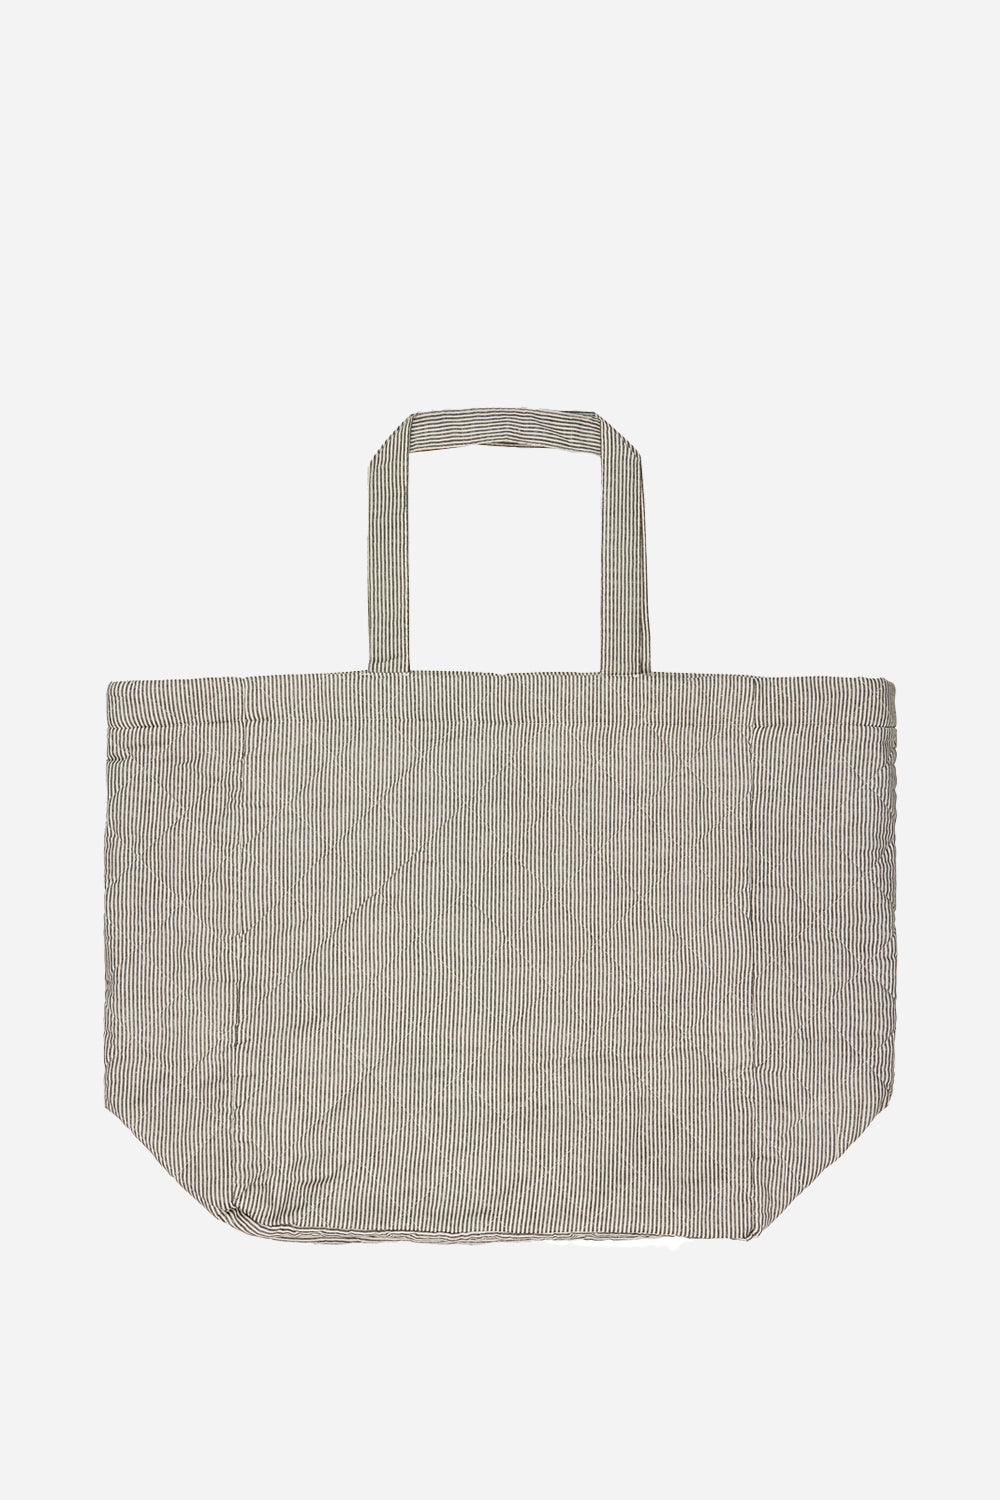 Quilted Cotton Bag / Grey Stripe